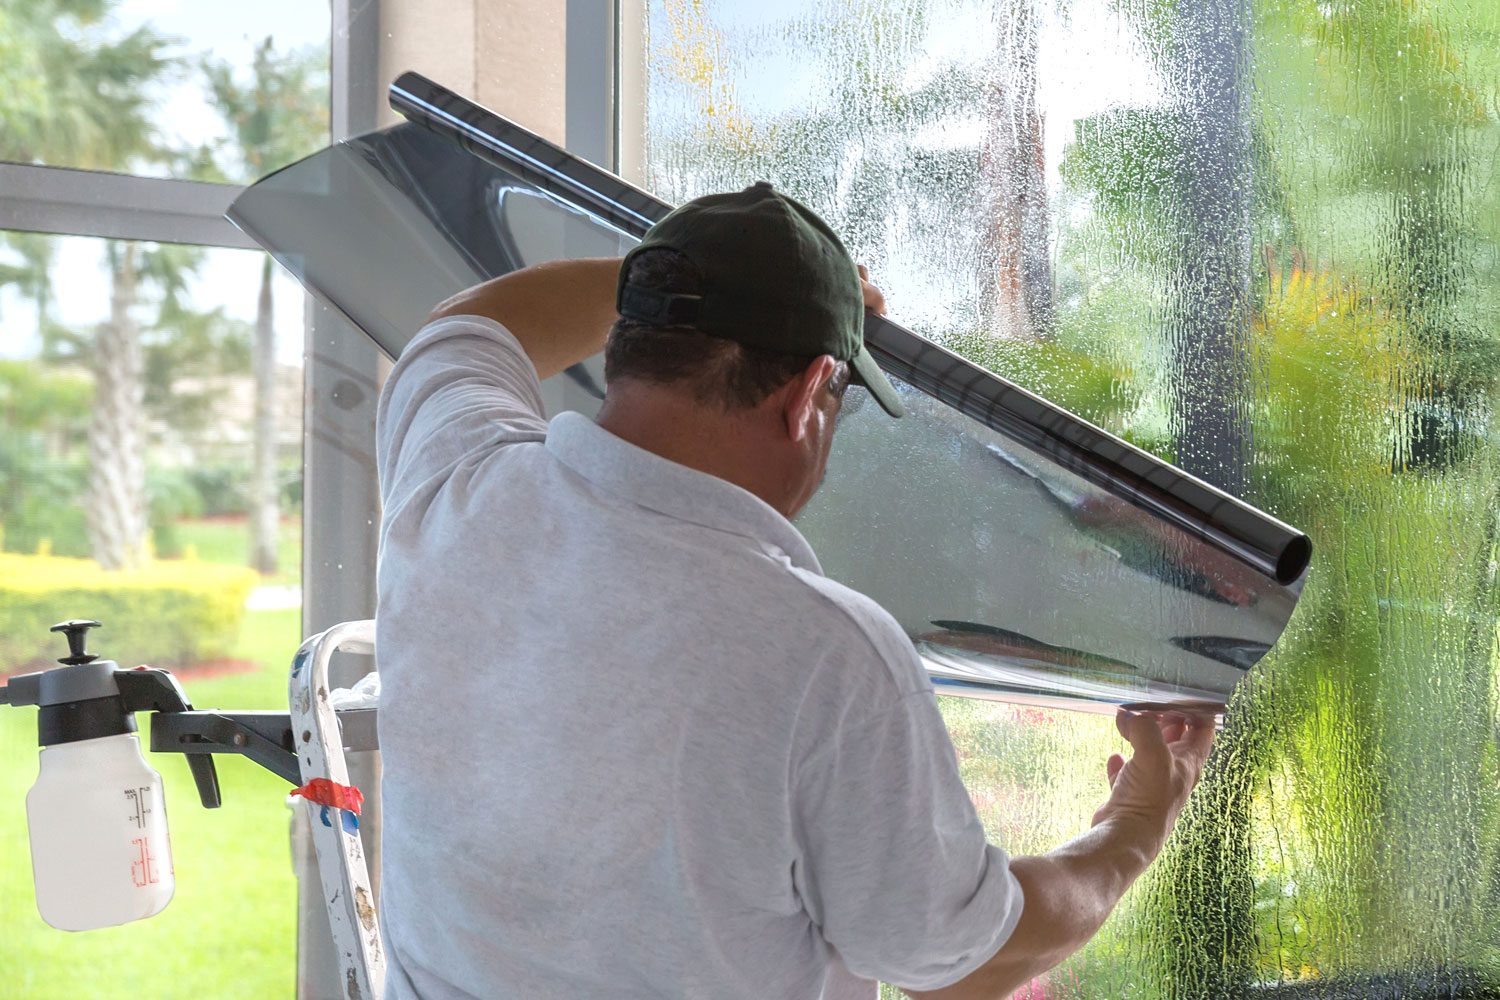 Employee works to install Window tinting in Florida where the sun makes the house very hot and fades furniture